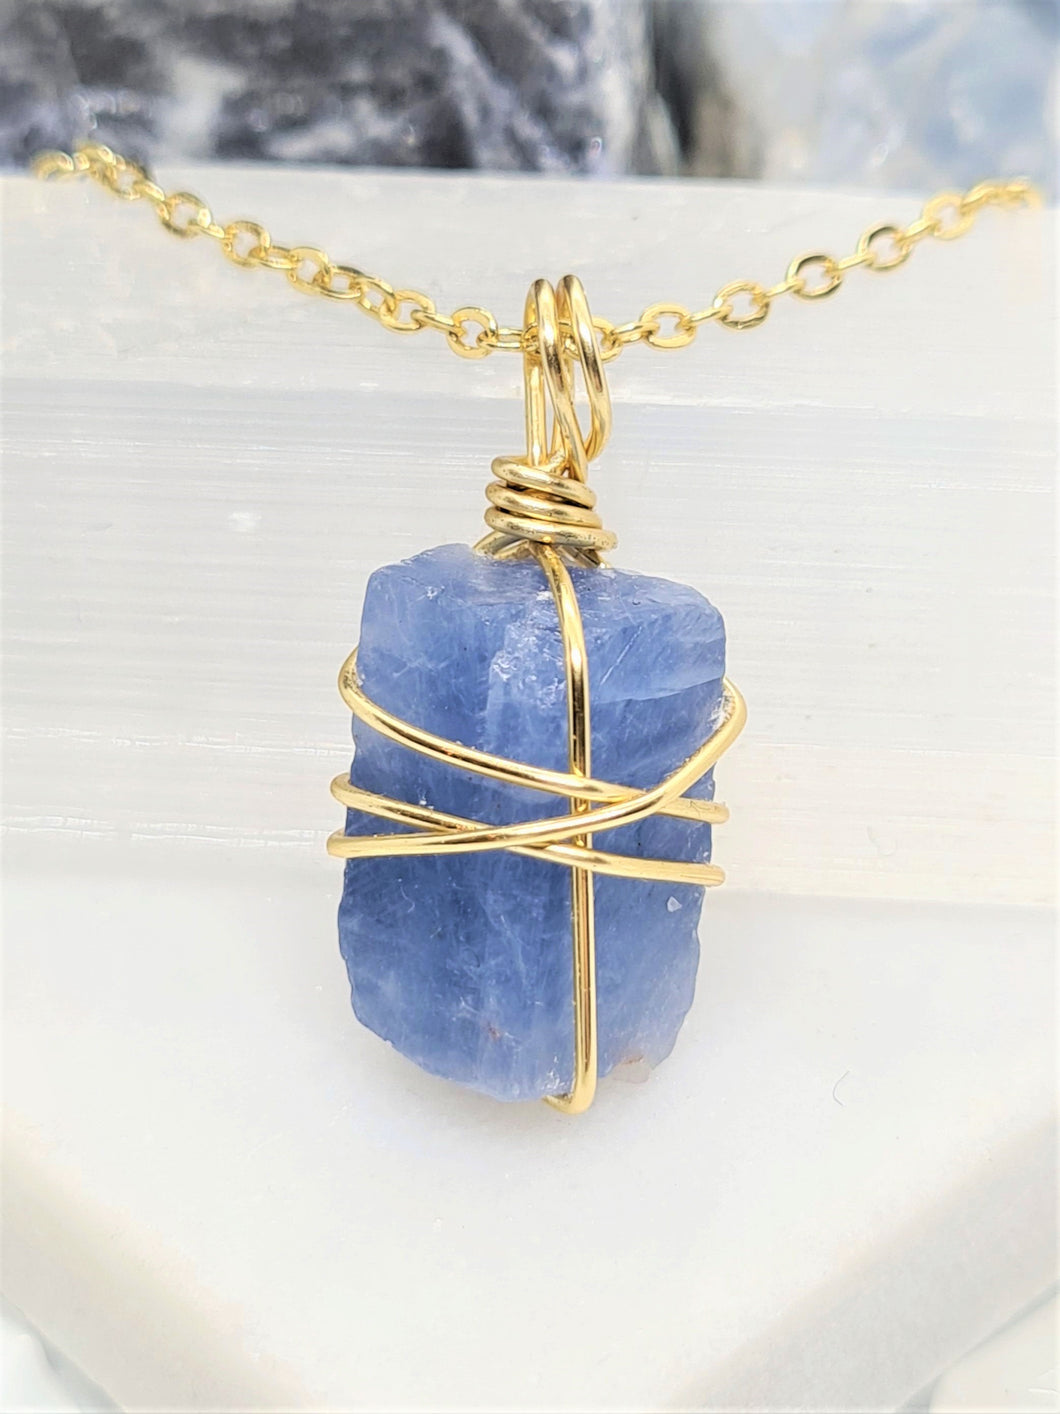 Blue Calcite is soothing and provides nurturing energies that help you work through personal challenges and unresolved trauma.